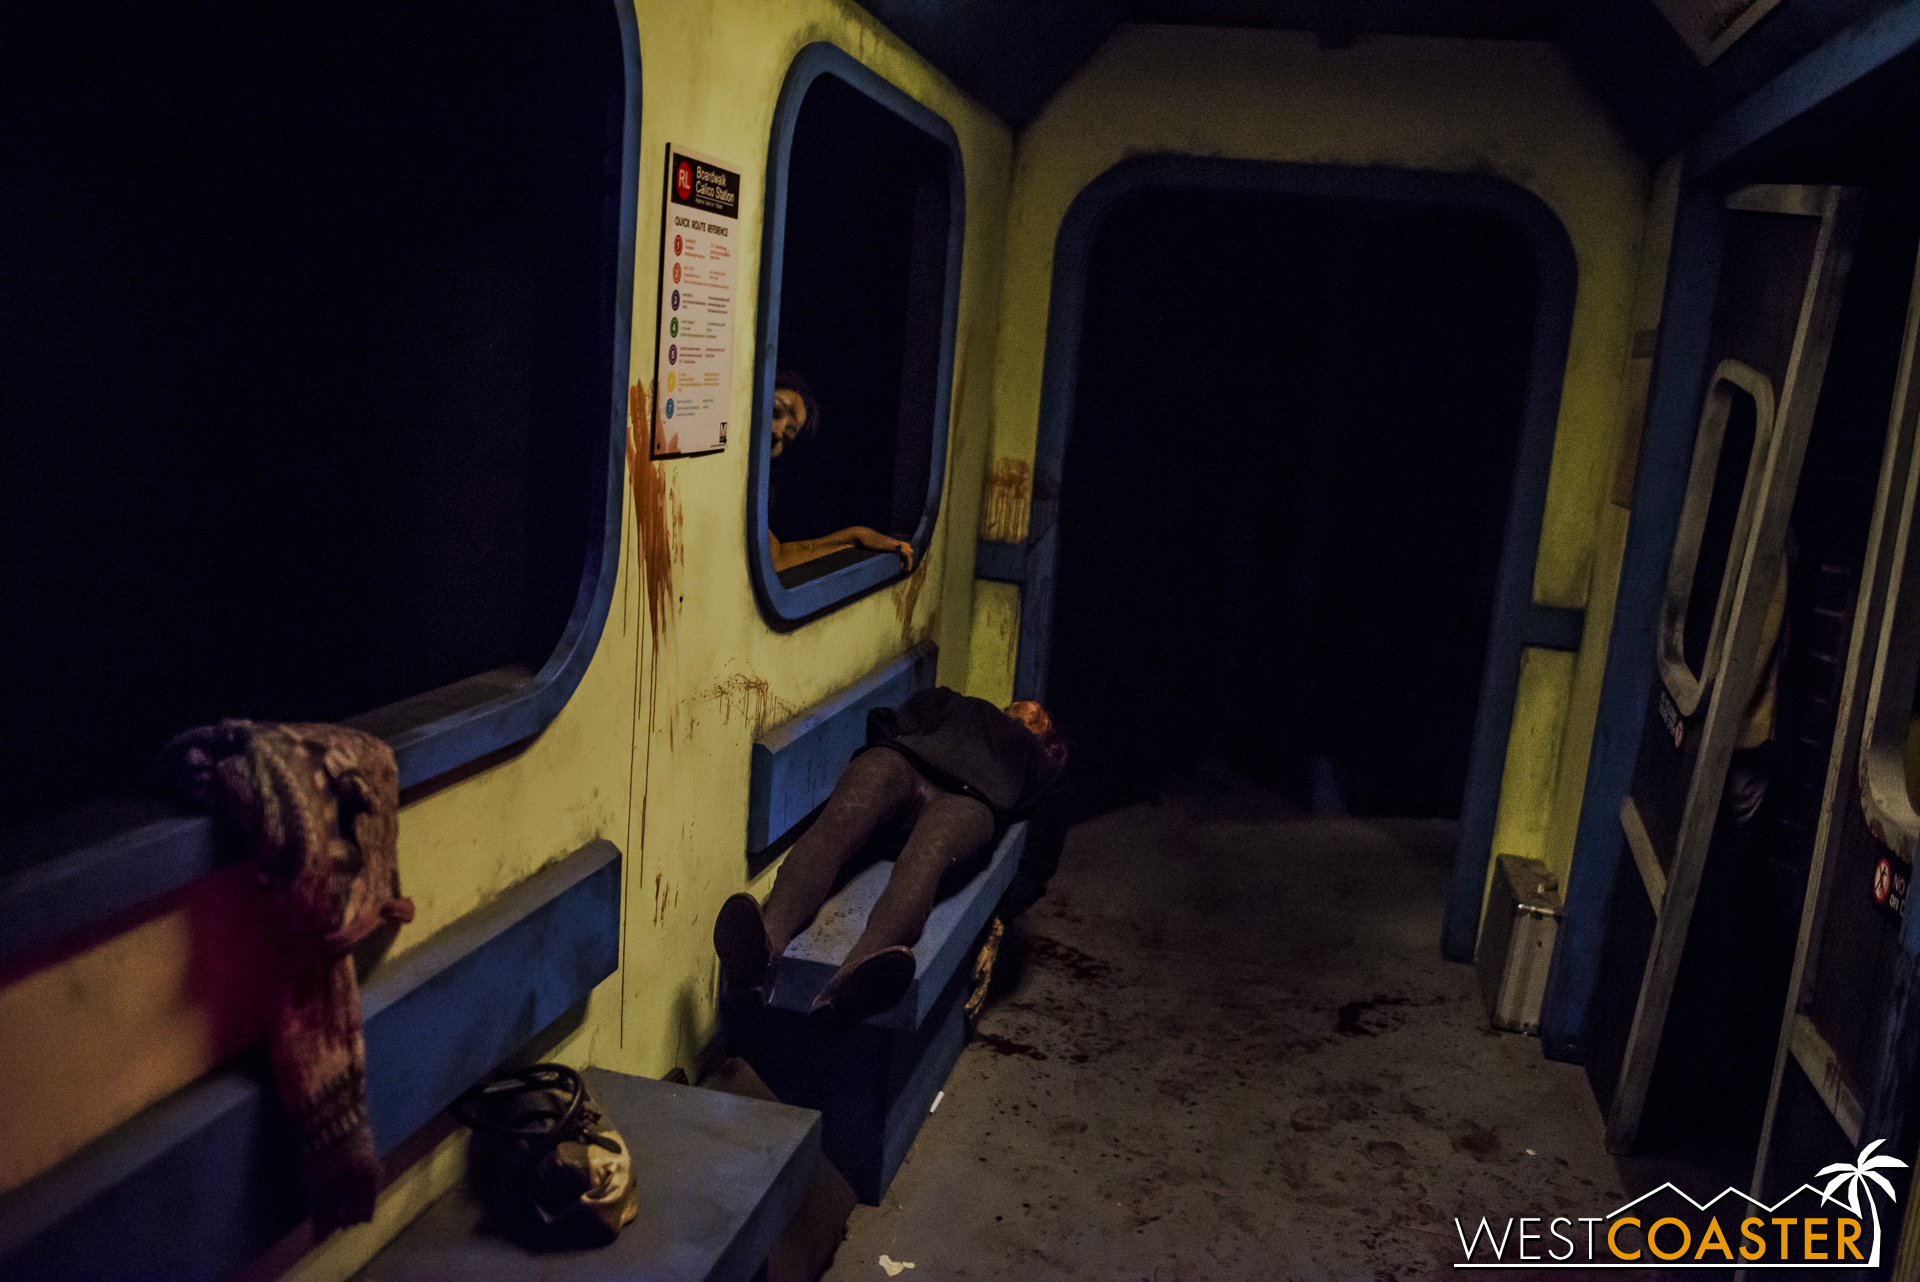  Going through subway cars, with zombies attacking at random. 